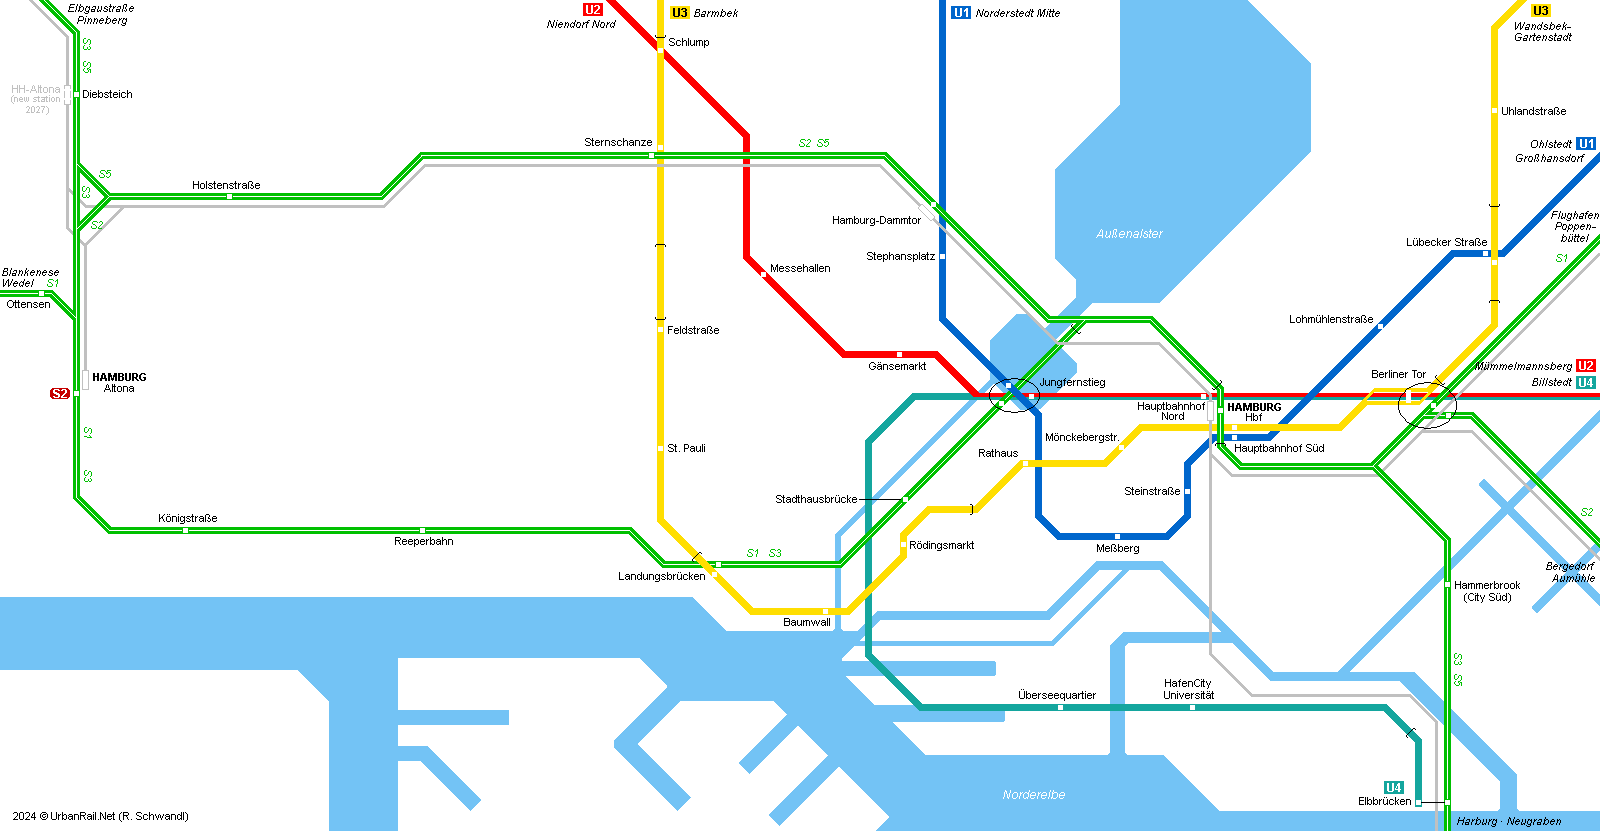 Hamburg U-Bahn Map > Click on map to expand to full size >>>